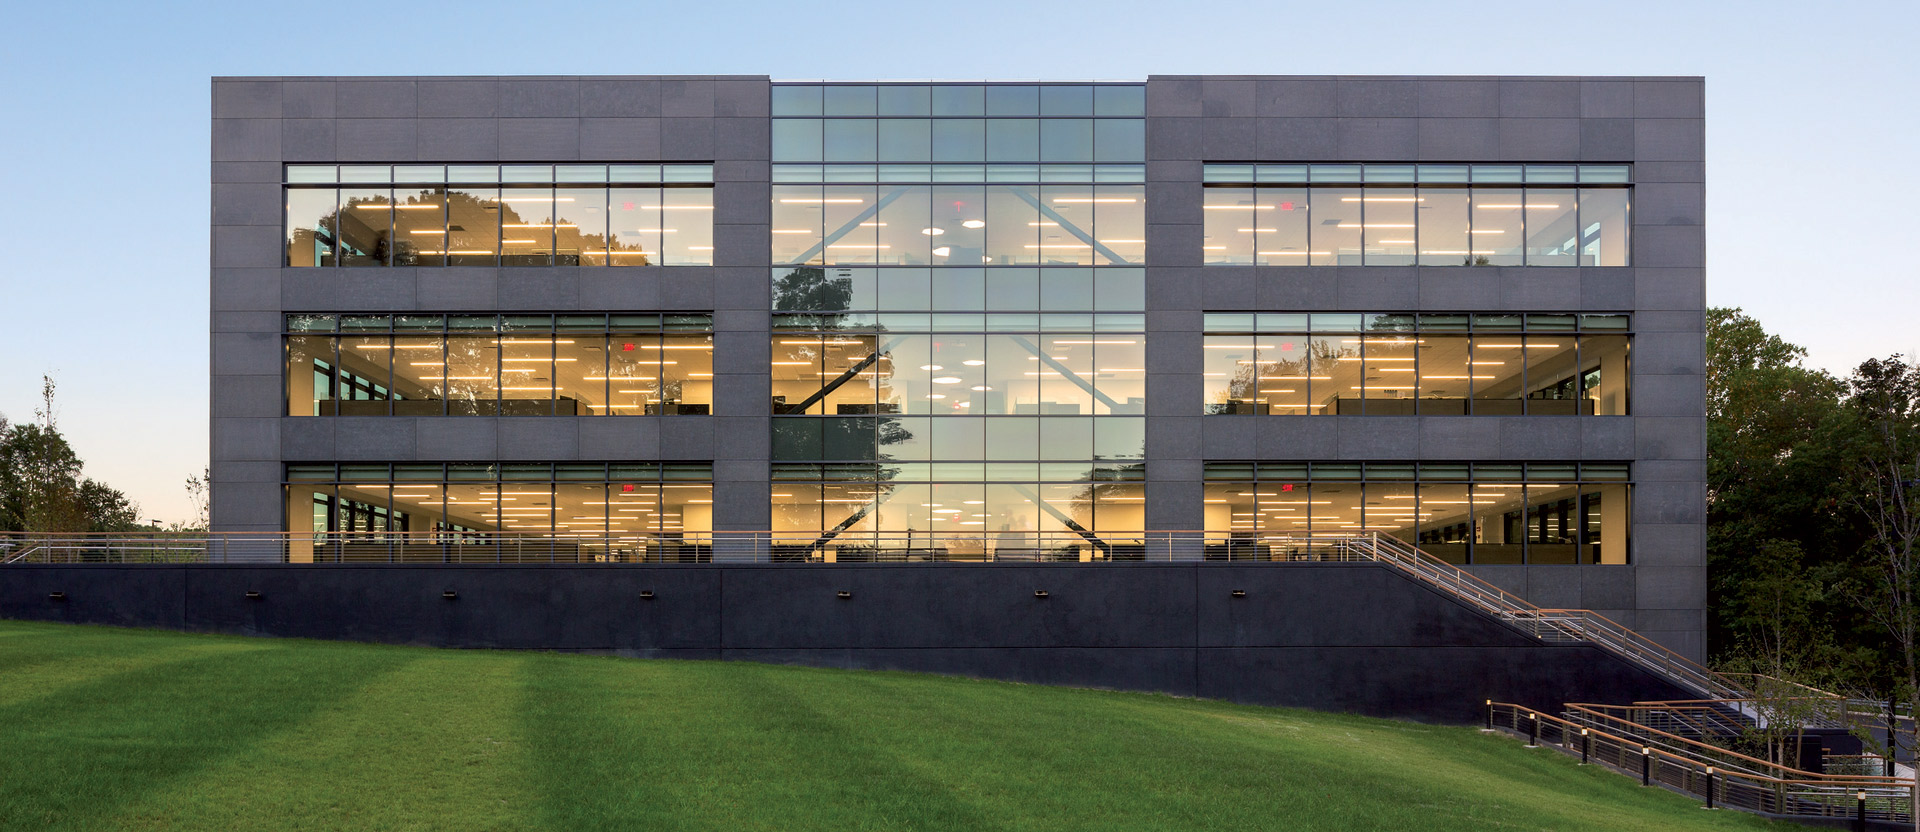 Modern office building at dusk with a fully glazed façade offering a glimpse of the multi-level, open-plan interior spaces, and warm artificial lighting that contrasts with the cool blue of the twilight sky. The building’s geometric symmetry and use of glass reflect contemporary architectural design principles.